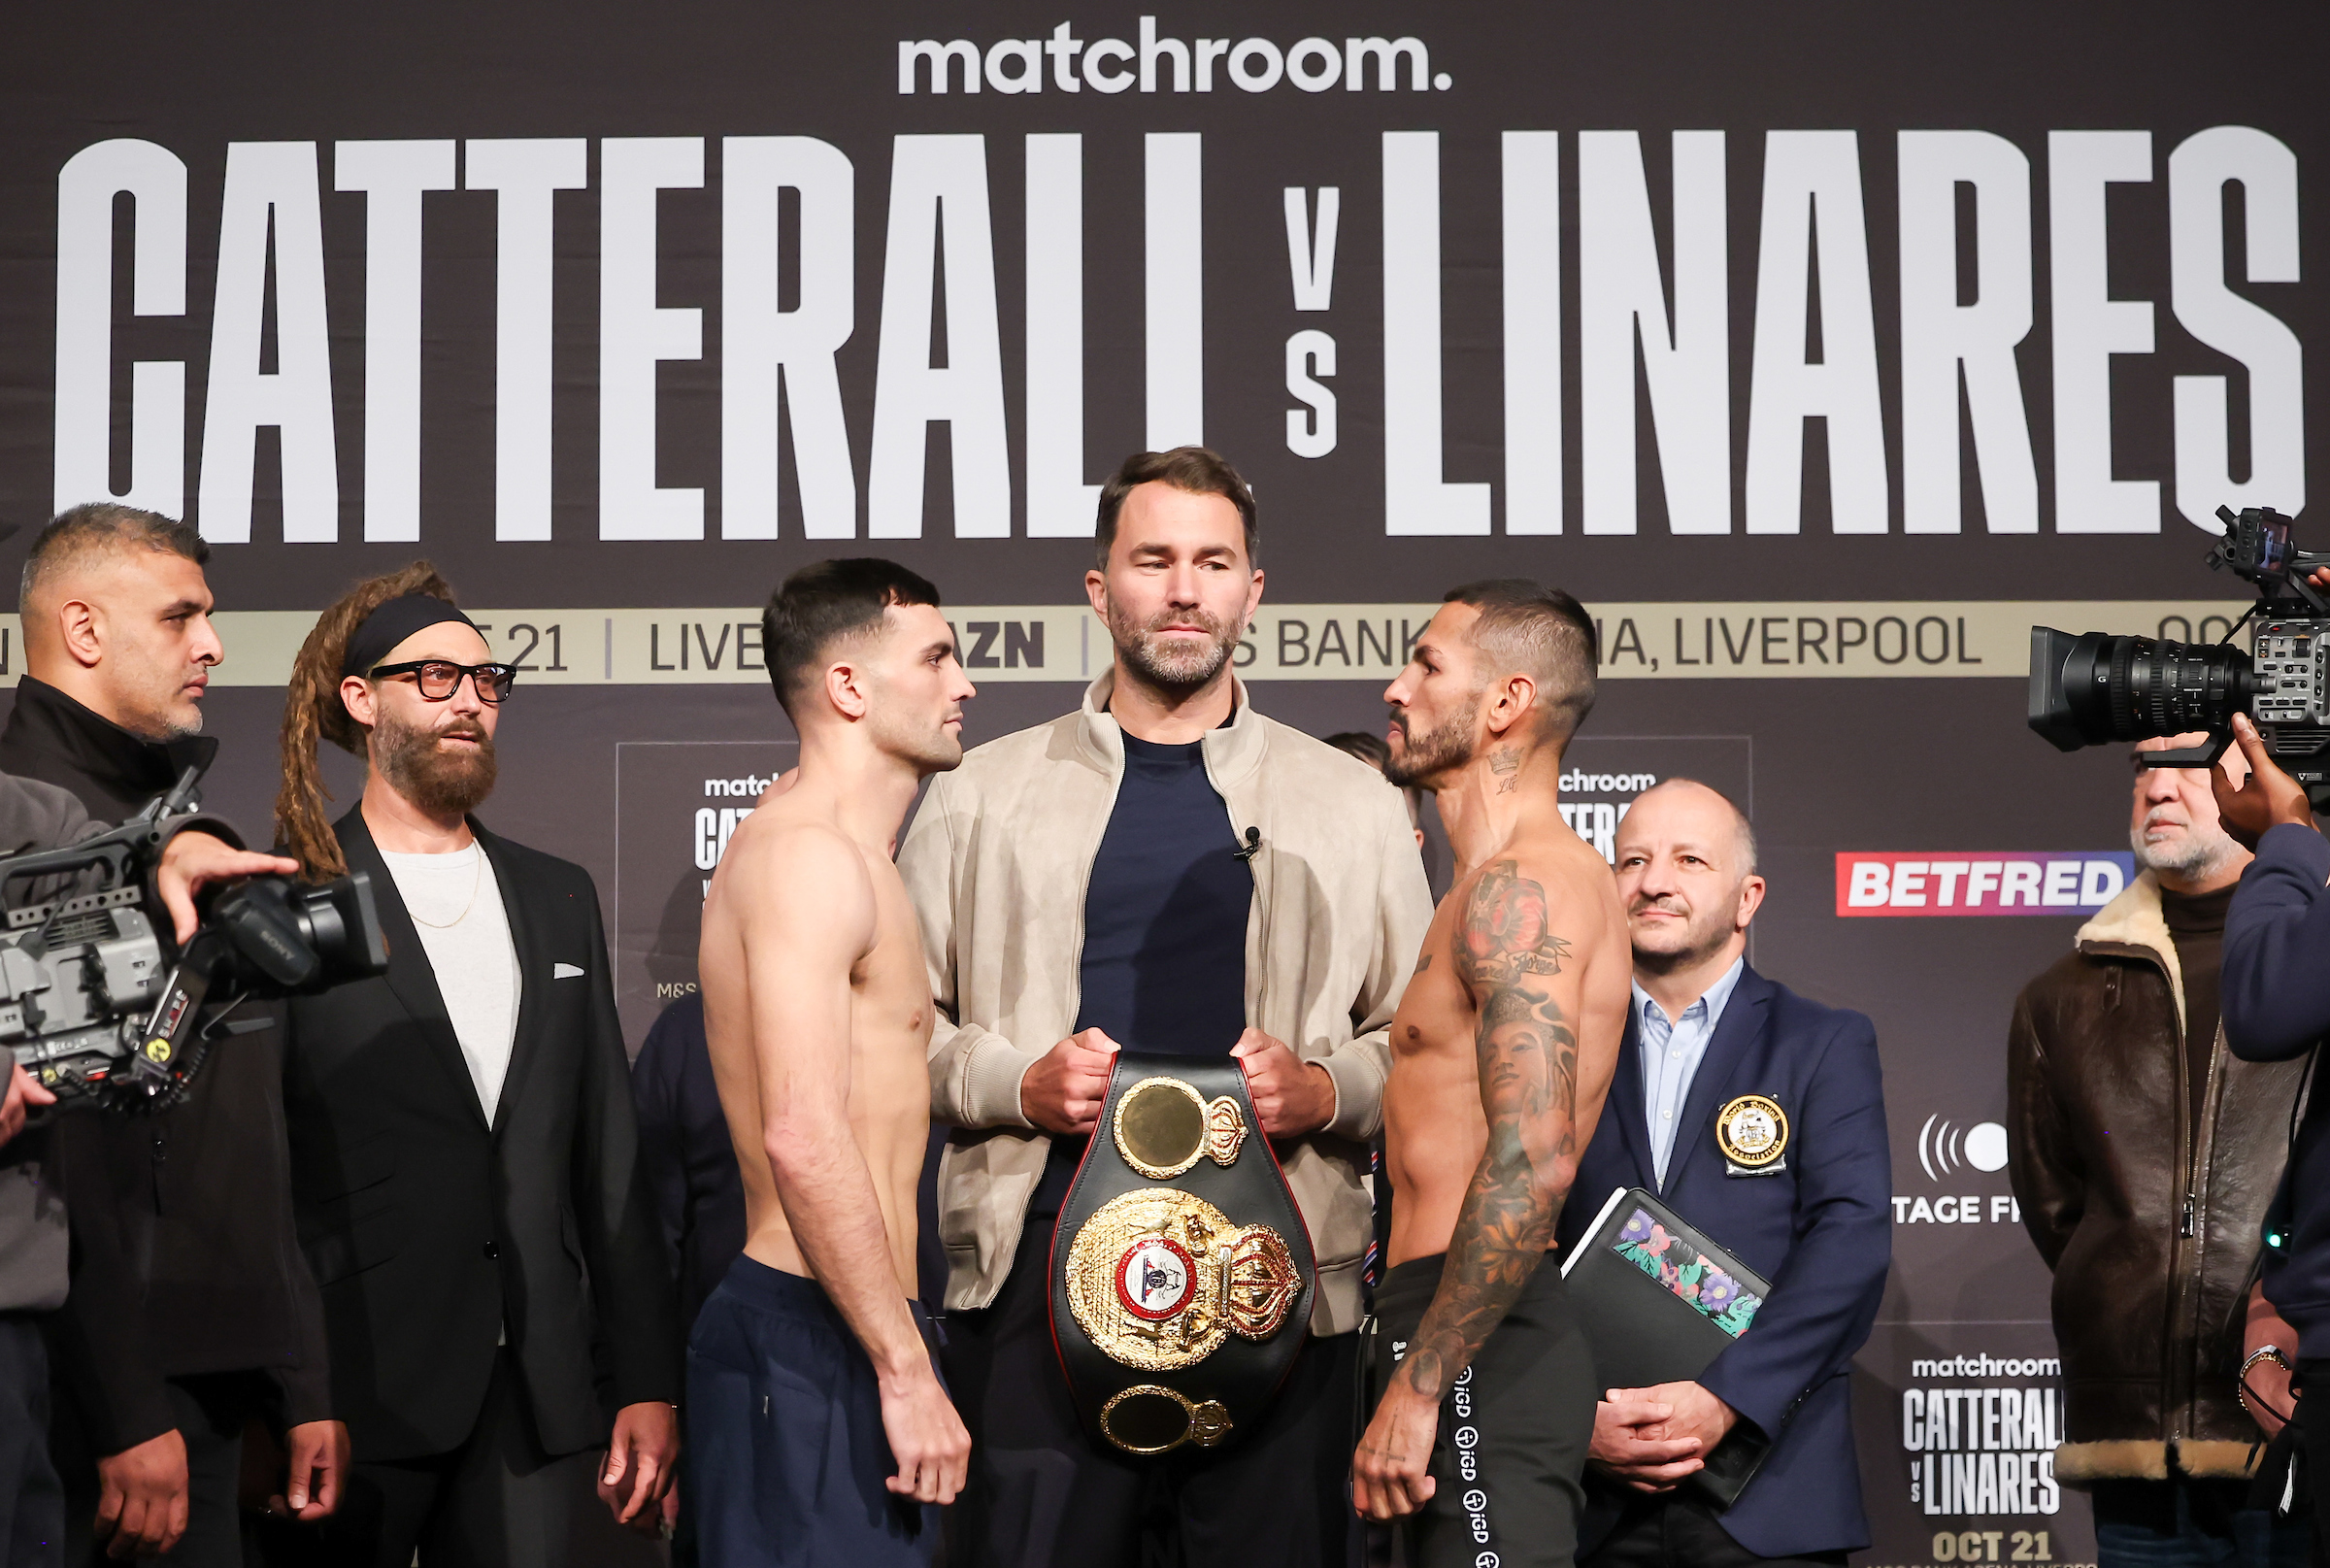 Catterall vs. Linares: Weigh-In Results & Betting Odds